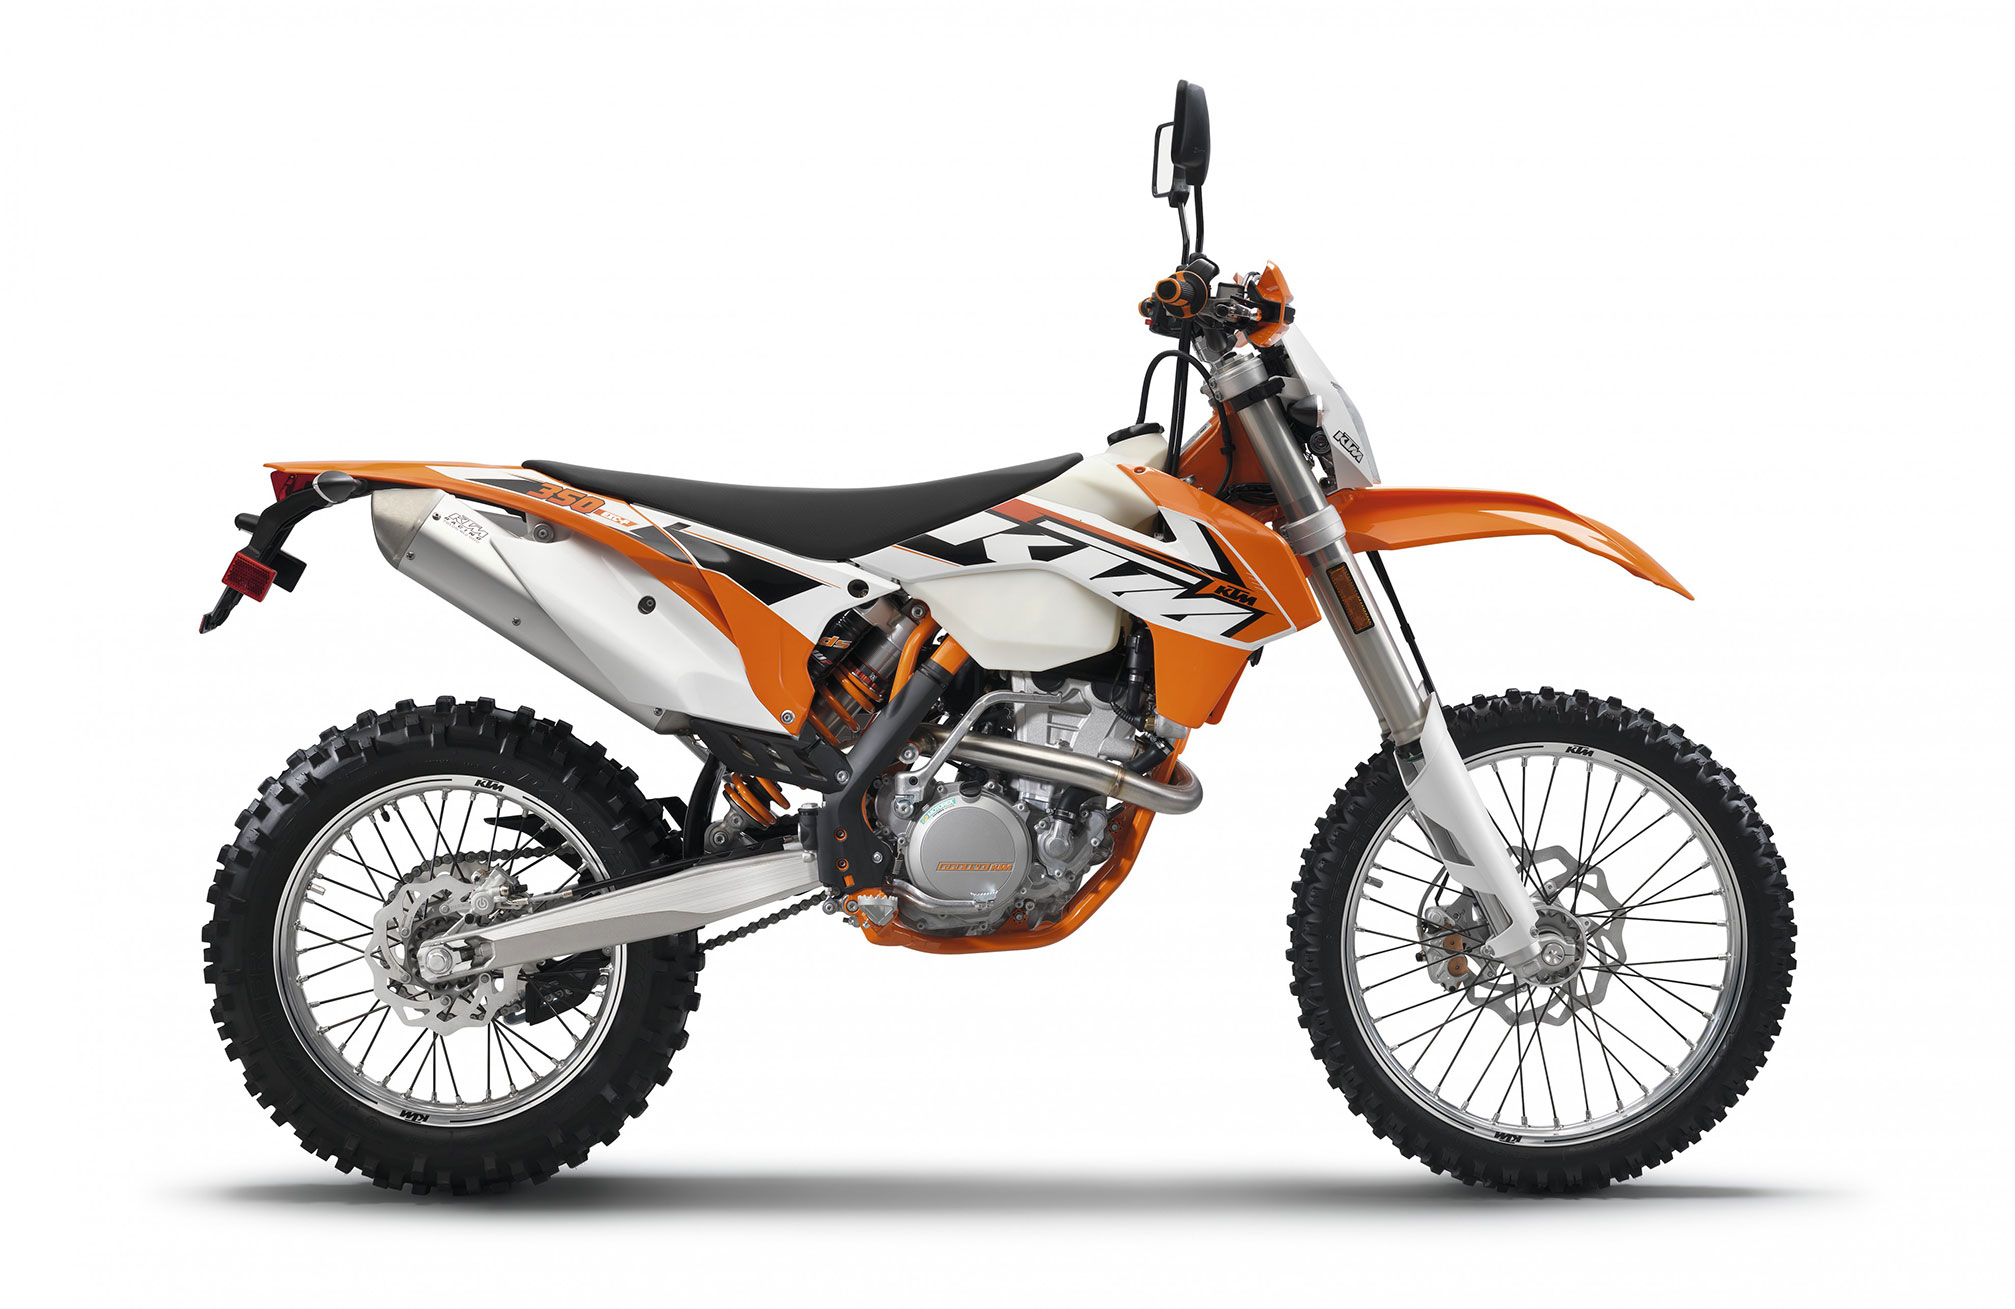 2015 KTM 350 EXC-F Review